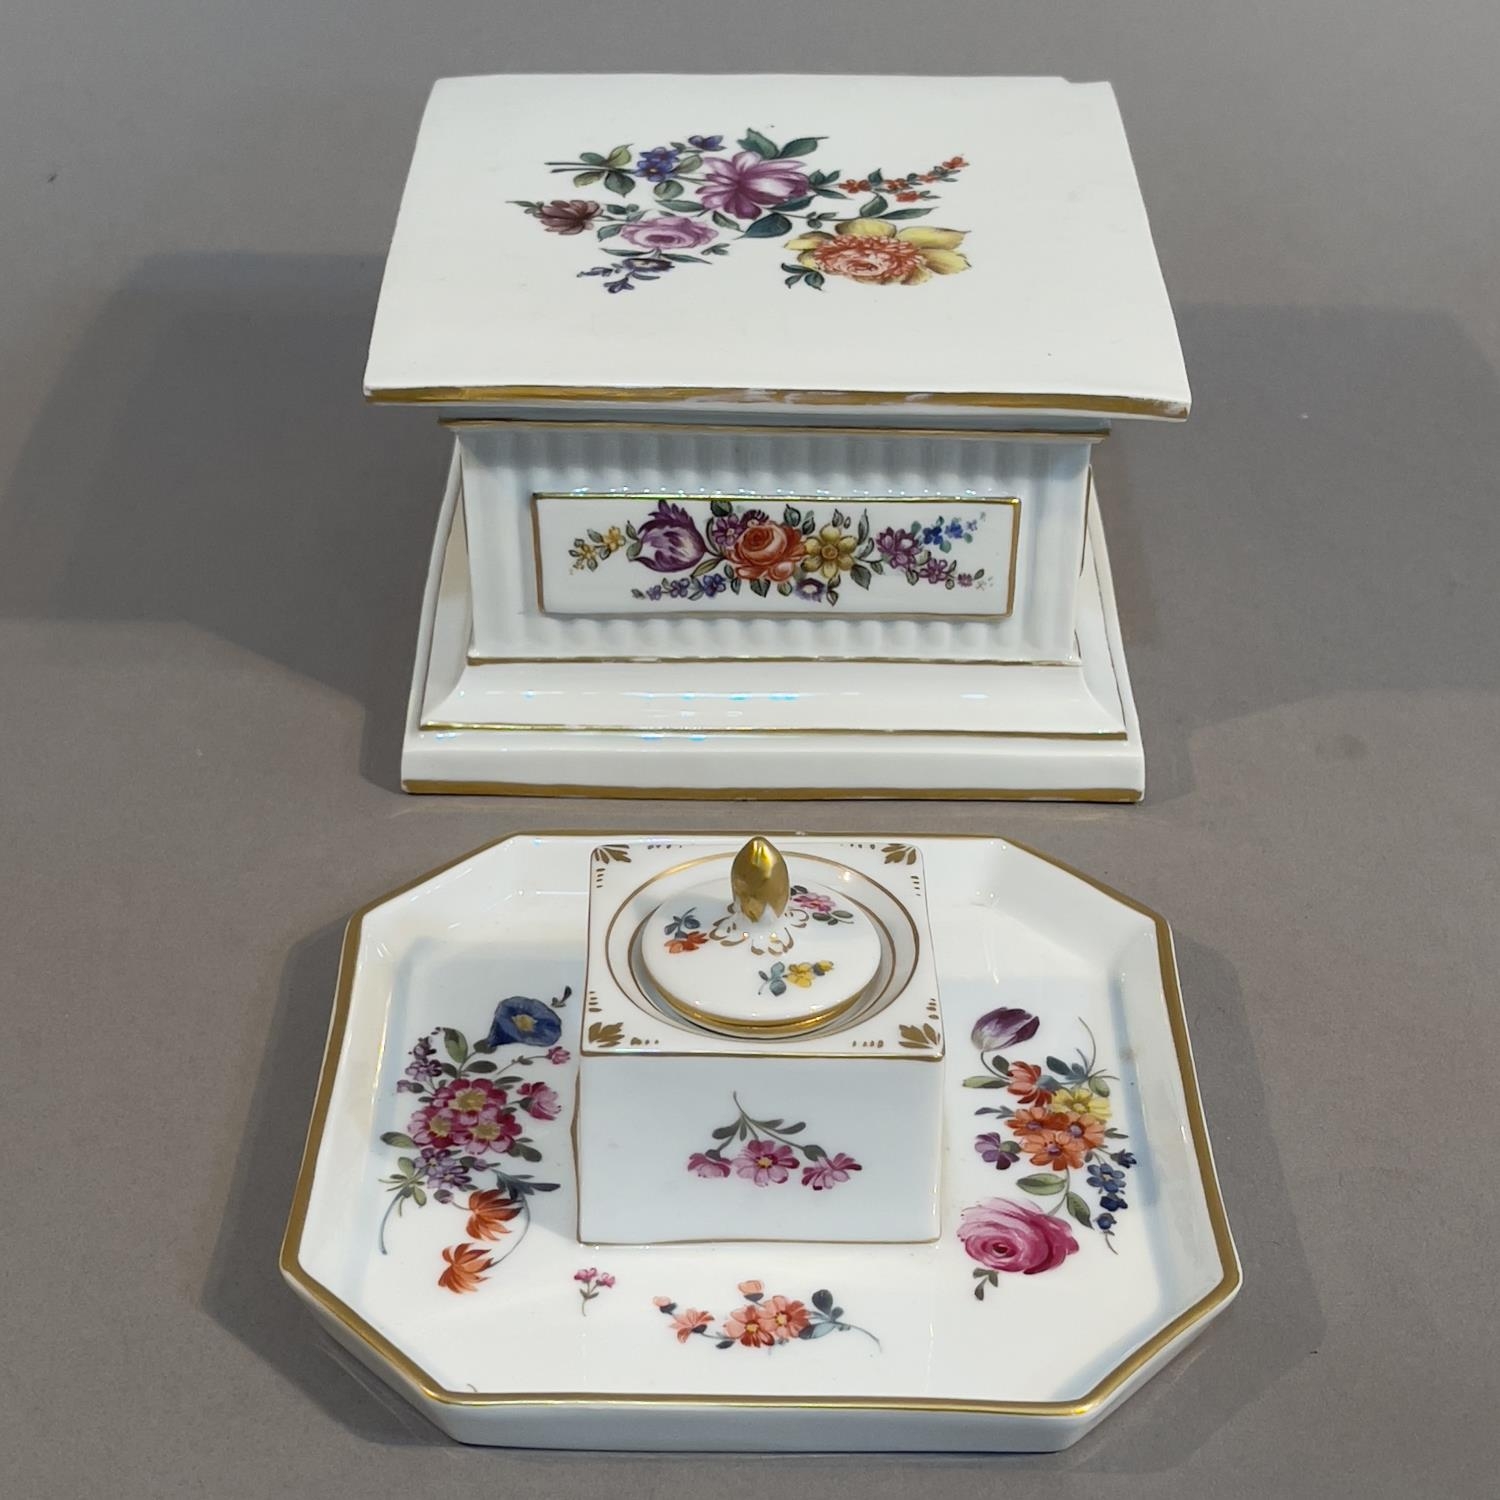 A 19th century Furstenberg porcelain stand of square outline, polychrome painted with a spray of